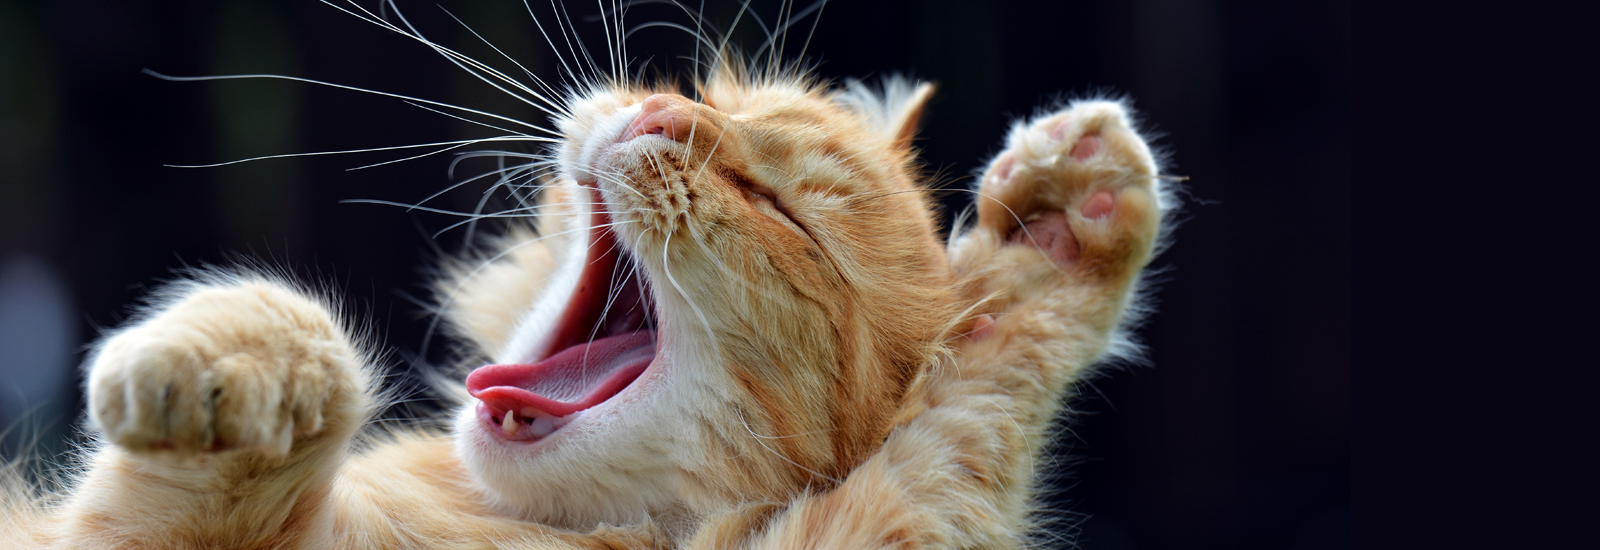 Tooth problems in cats